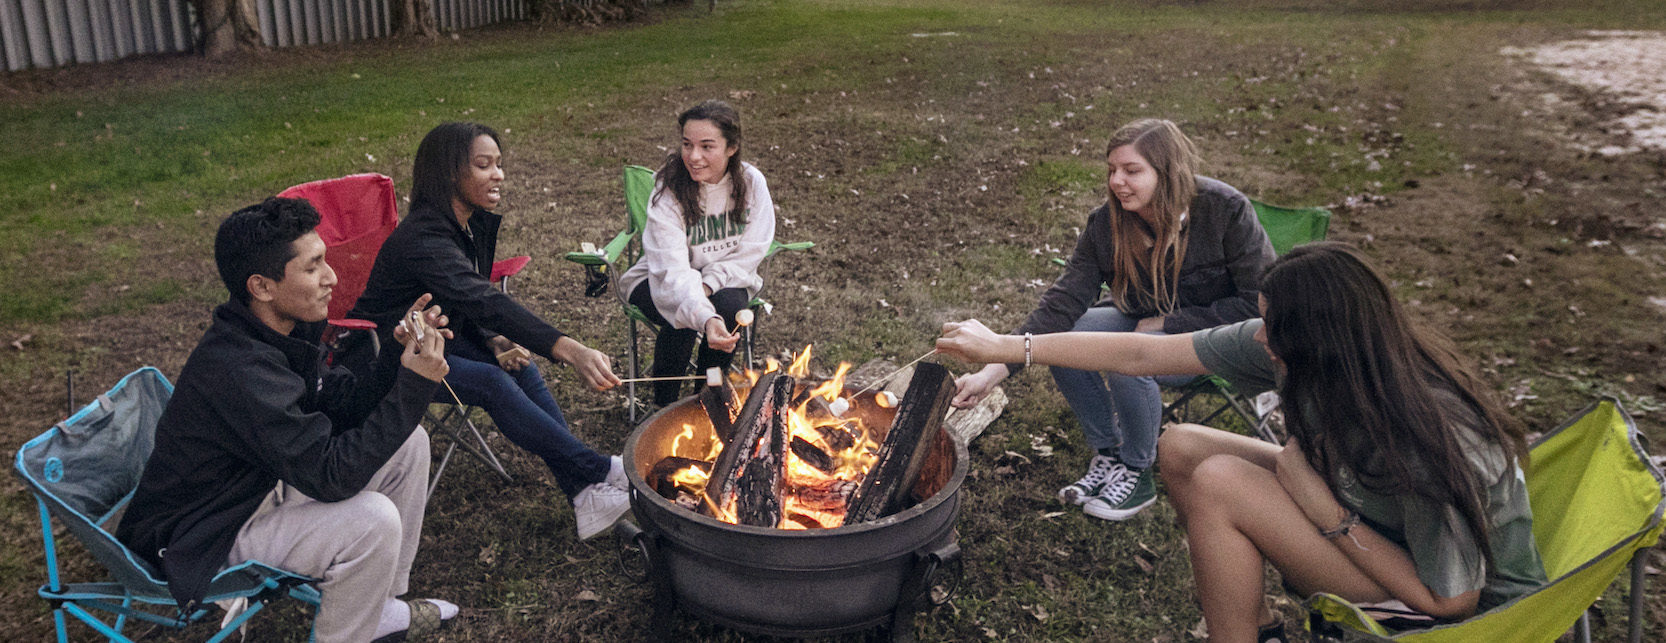 Students at fire pit